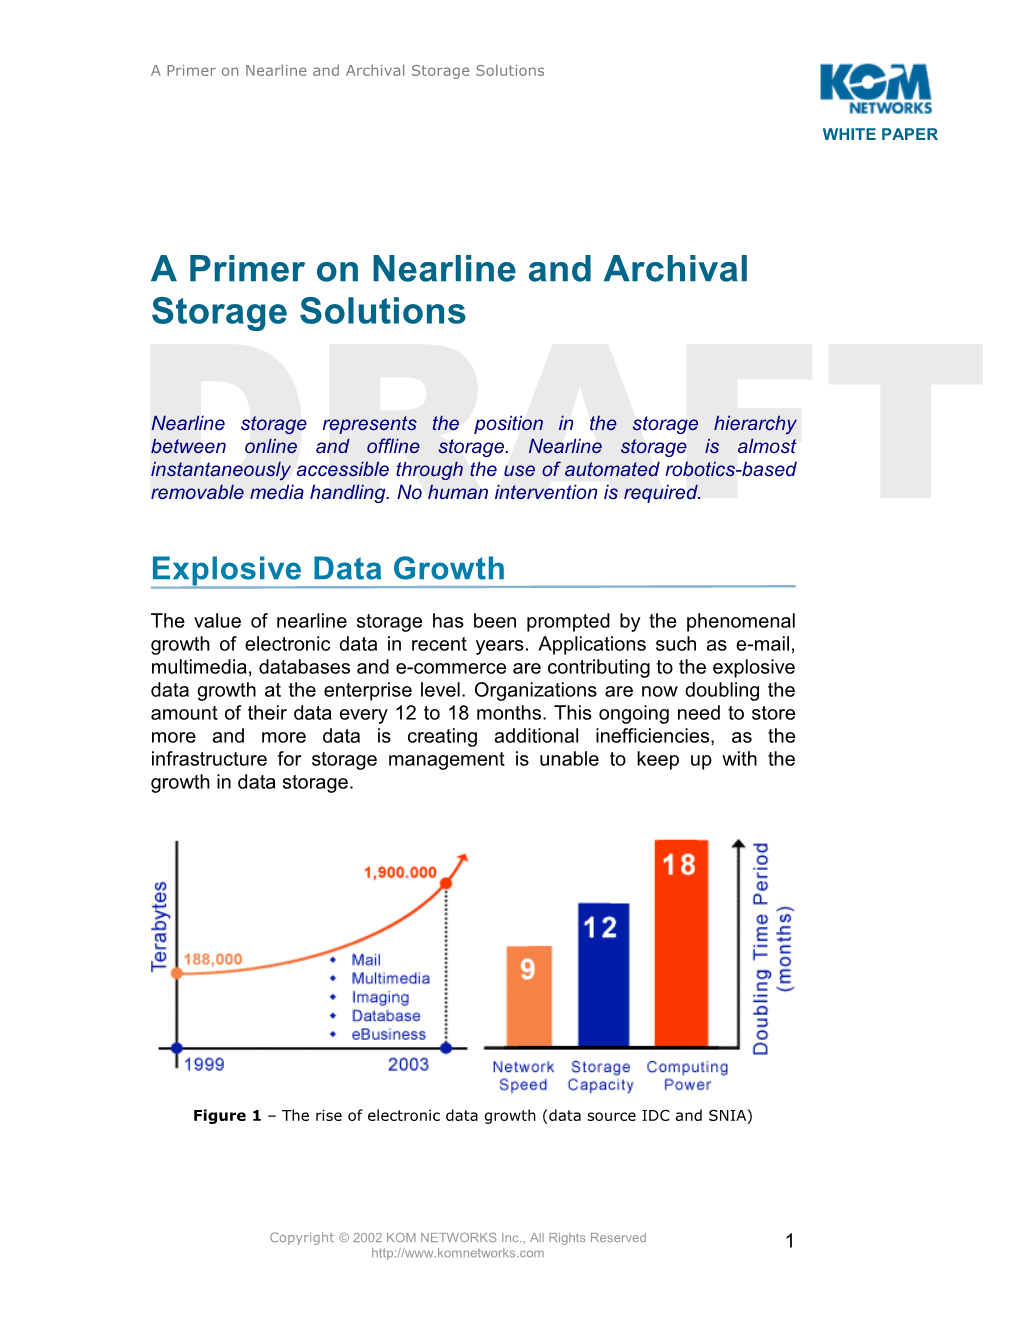 A Primer on Nearline and Archival Storage Solutions